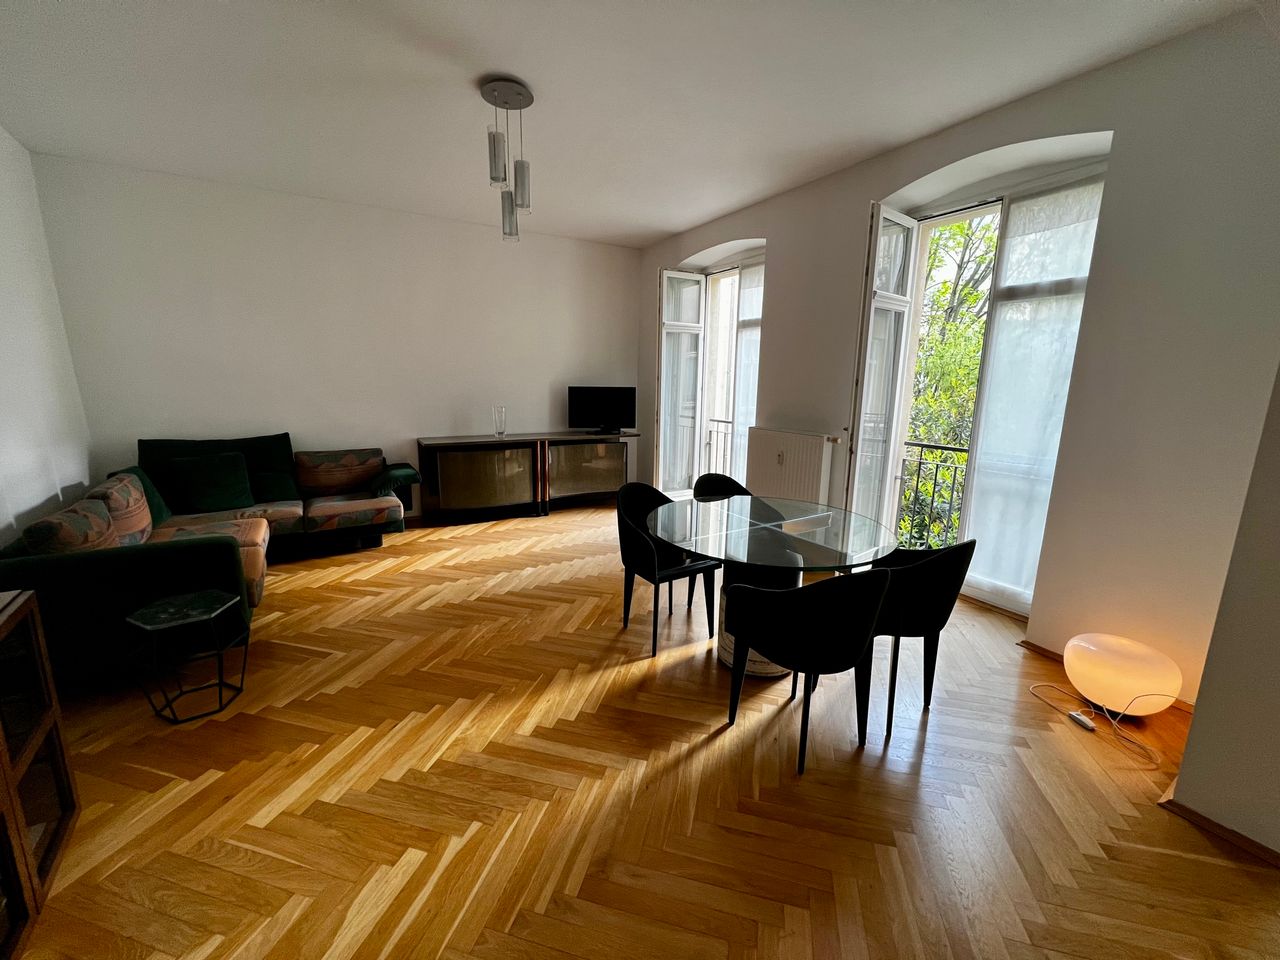 Spacious, high quality loft in Mitte